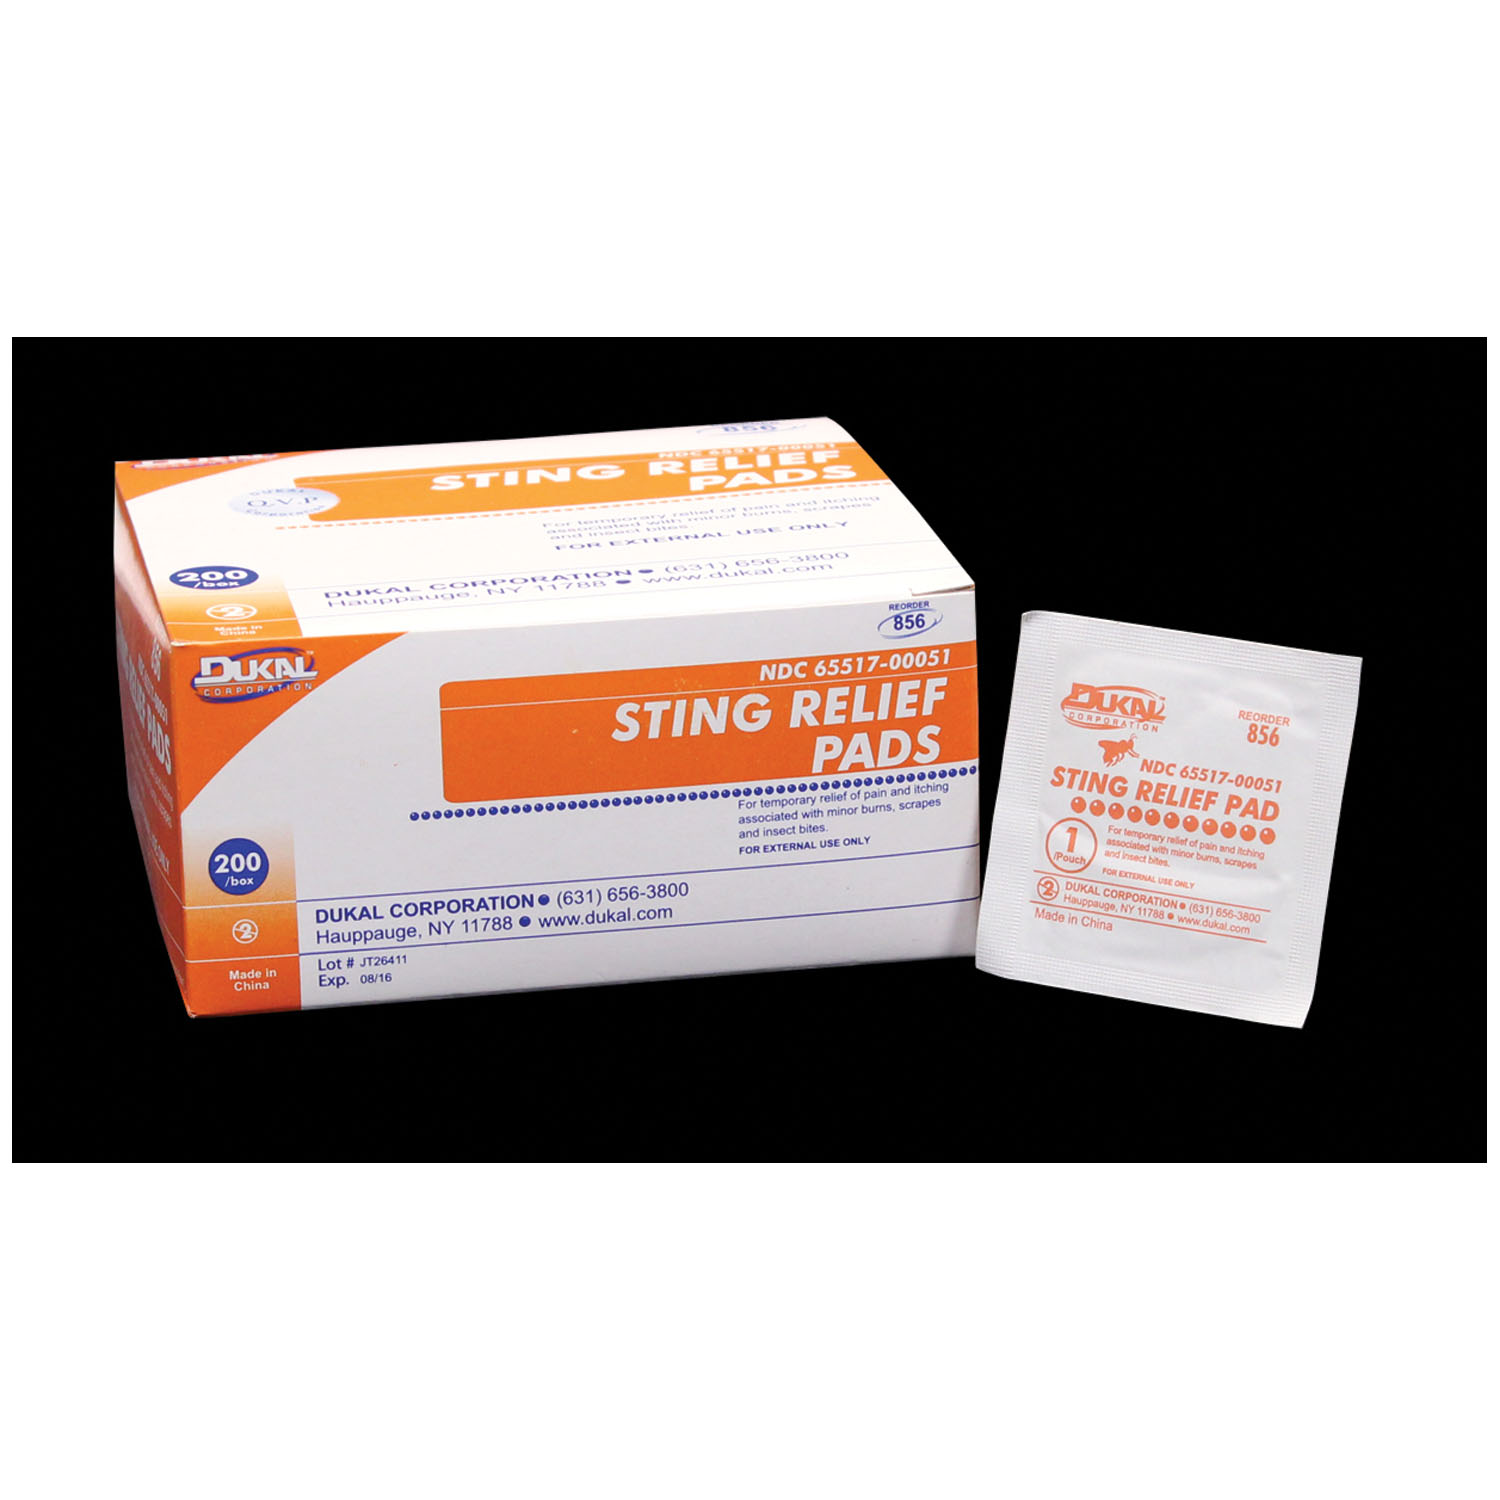 DUKAL STING RELIEF PAD : 856 CS $82.01 Stocked